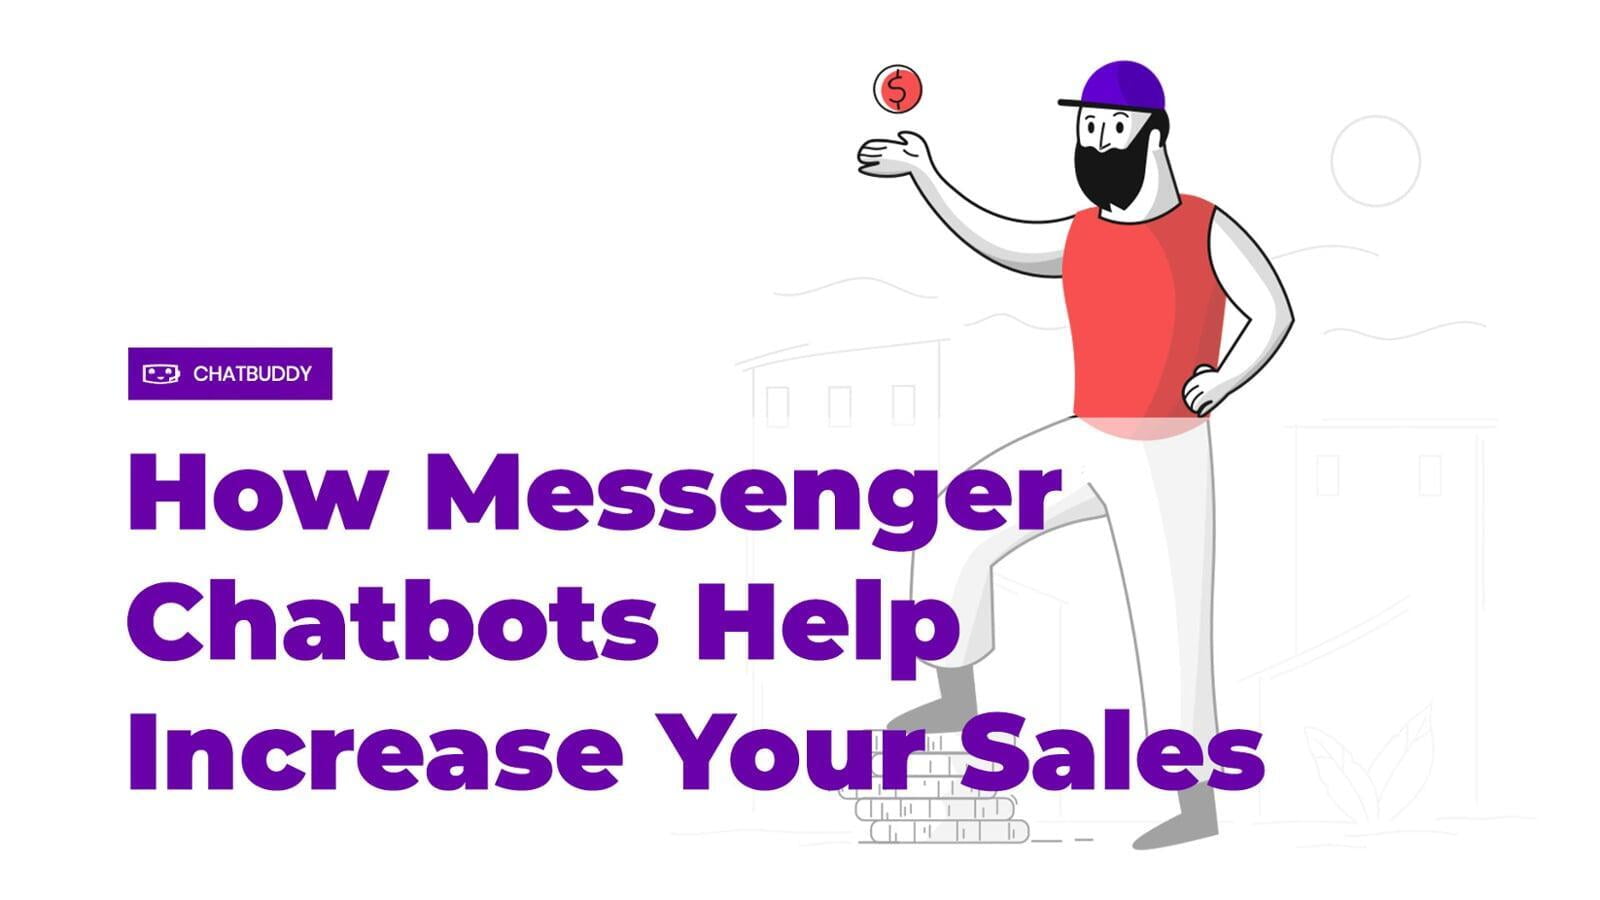 How Messenger Chatbots Help Increase Your Sales